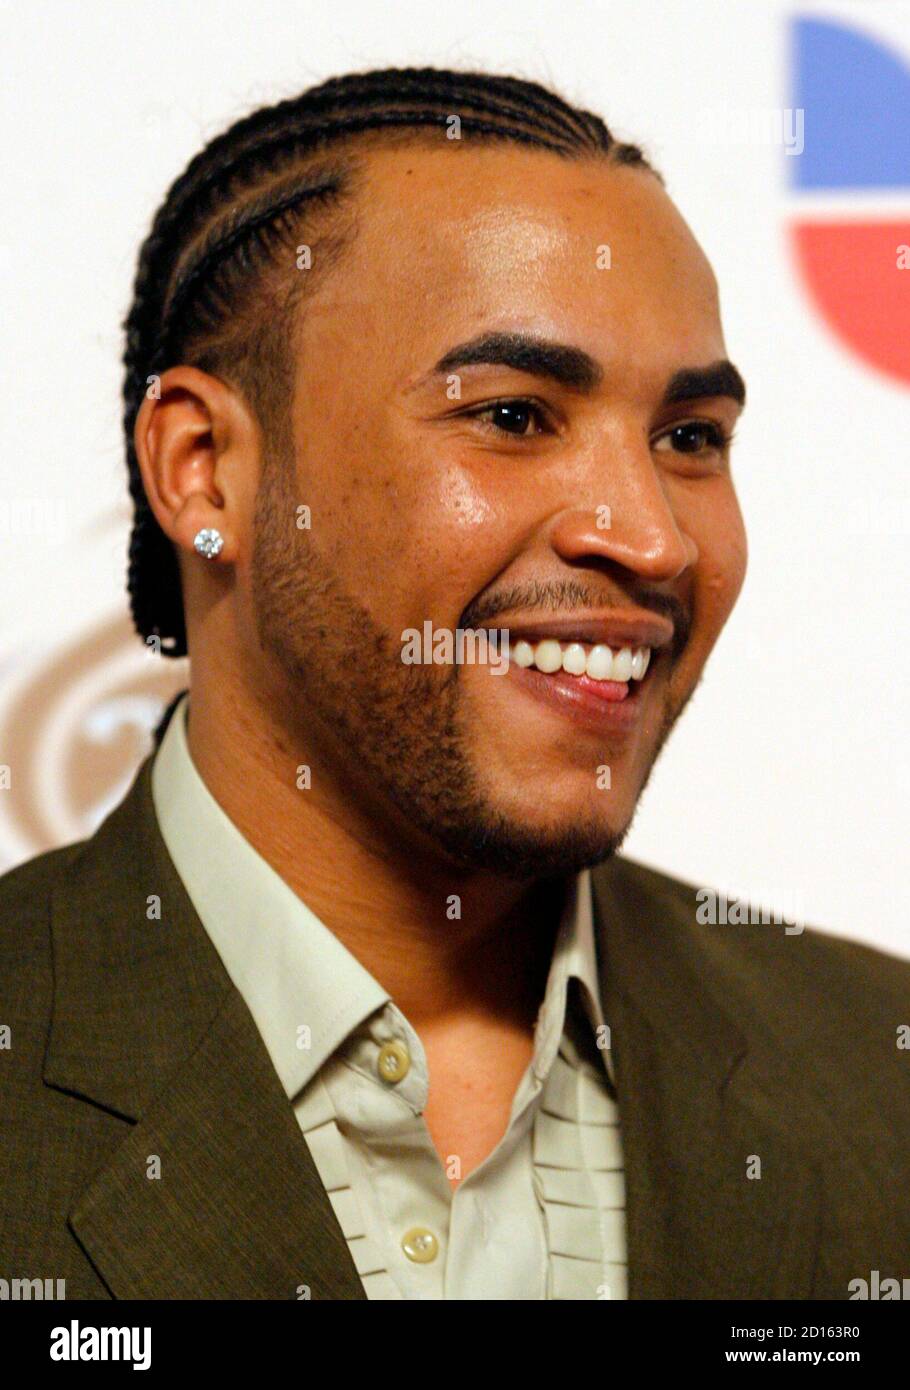 Reggaeton Singer Don Omar Of The United States Arrives At The Premio Lo Nuestro Latin Music Awards Show In Miami February 21 08 Reuters Eric Thayer United States Stock Photo Alamy